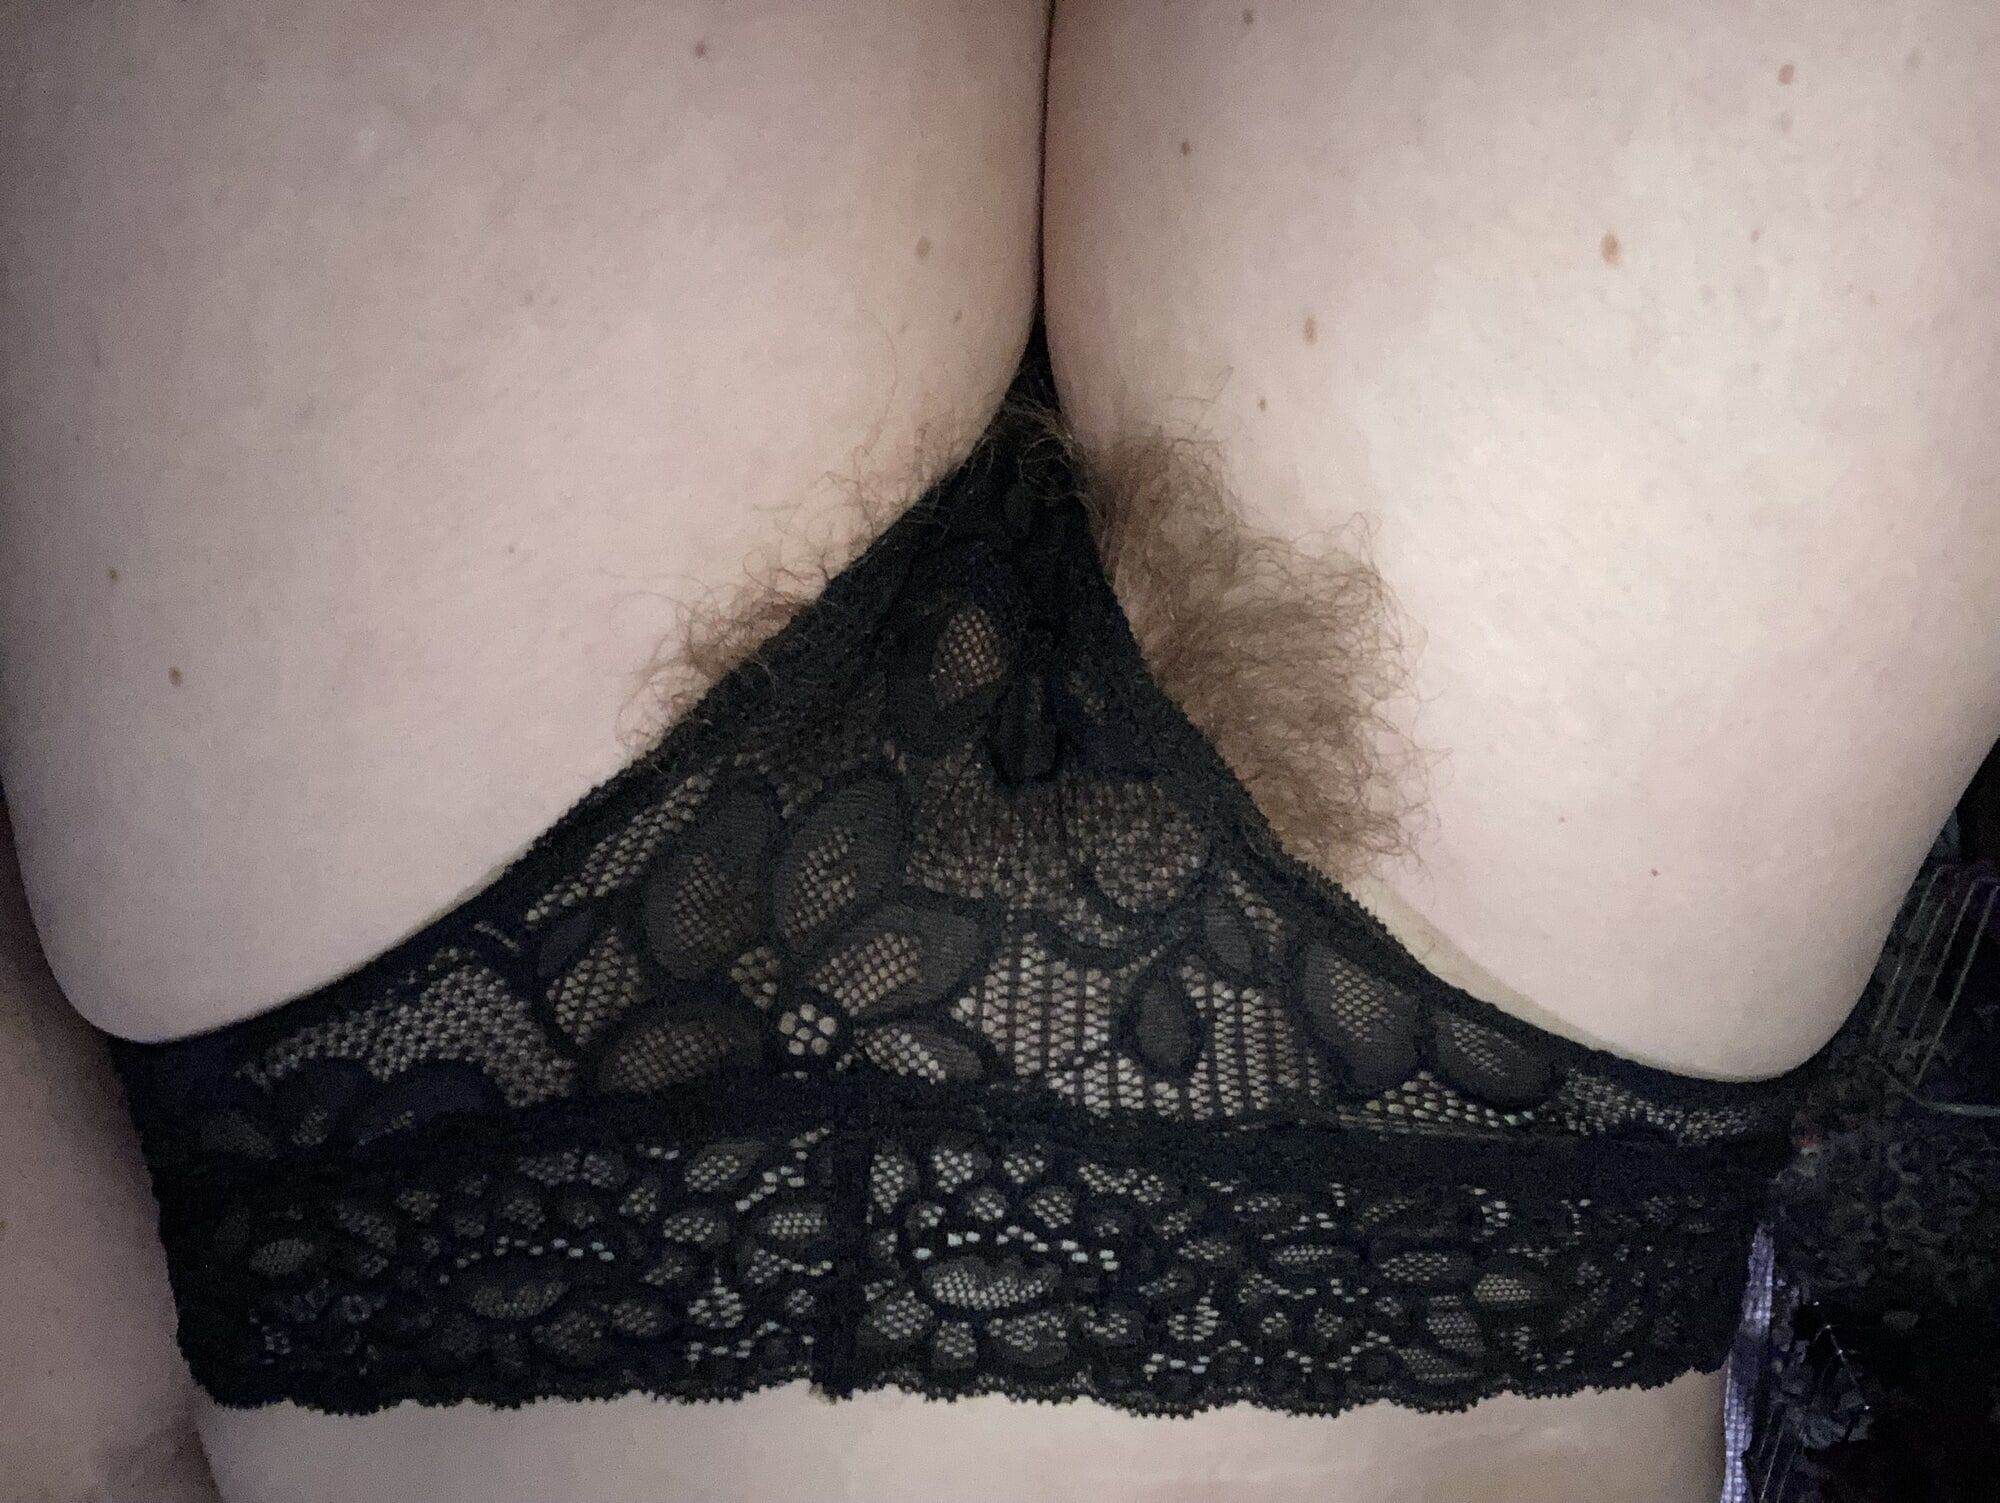 Lacy lingerie with whiskers  #6